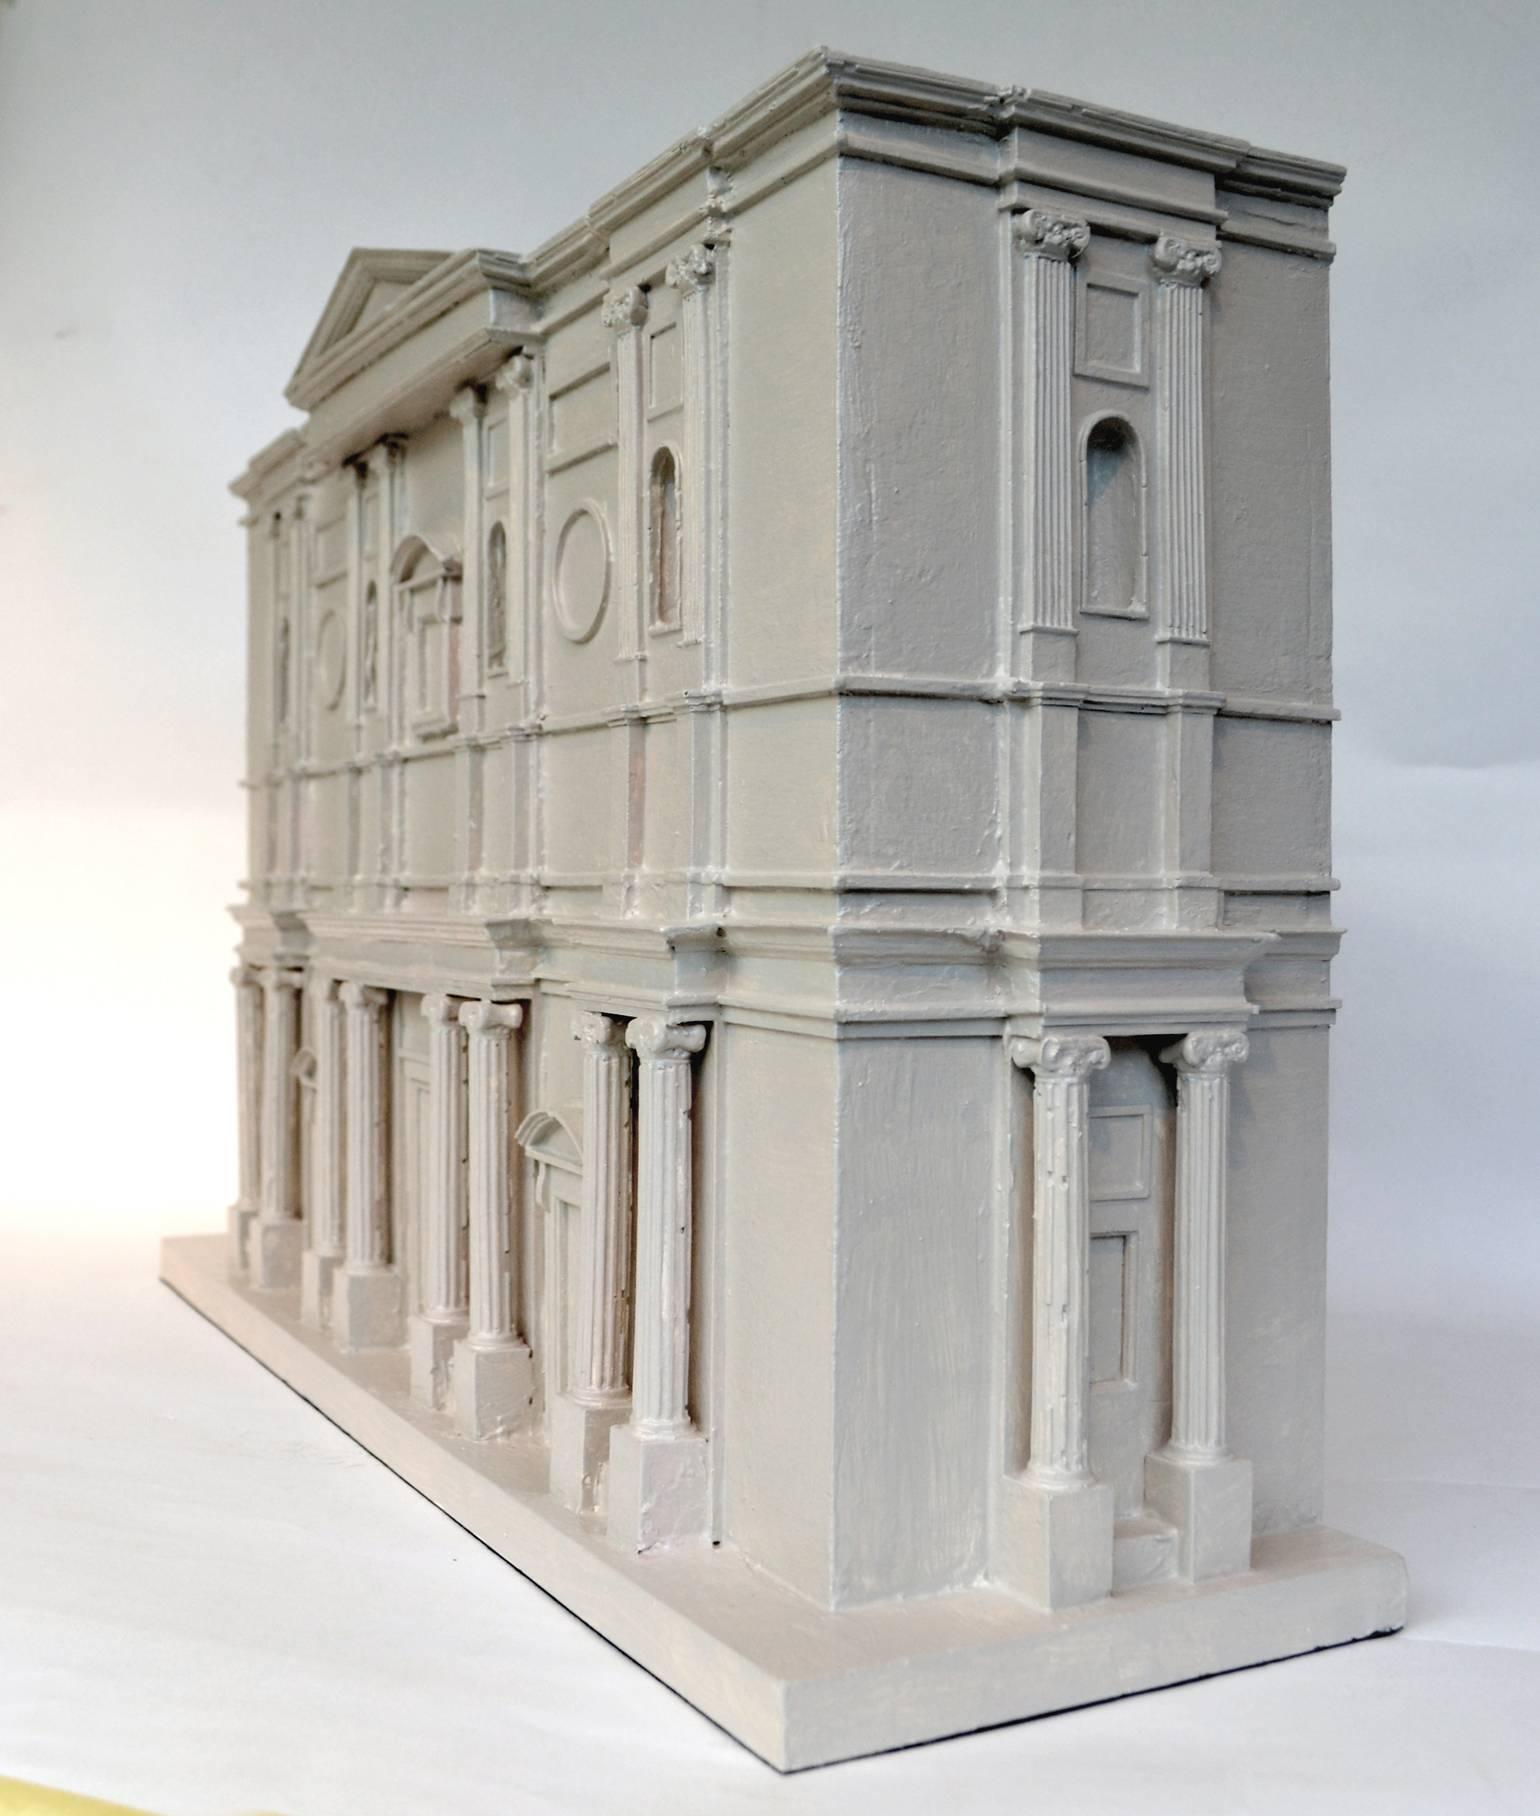 Unique contemporary take on 'Grand Tour' architectural model of the unexecuted 'Facade Basilica of San Lorenzo' 1516–1520 by Michelangelo. It is an impression of the original model, hand made in wood by the Dutch Scenographer Rudolph Lutgens.

The